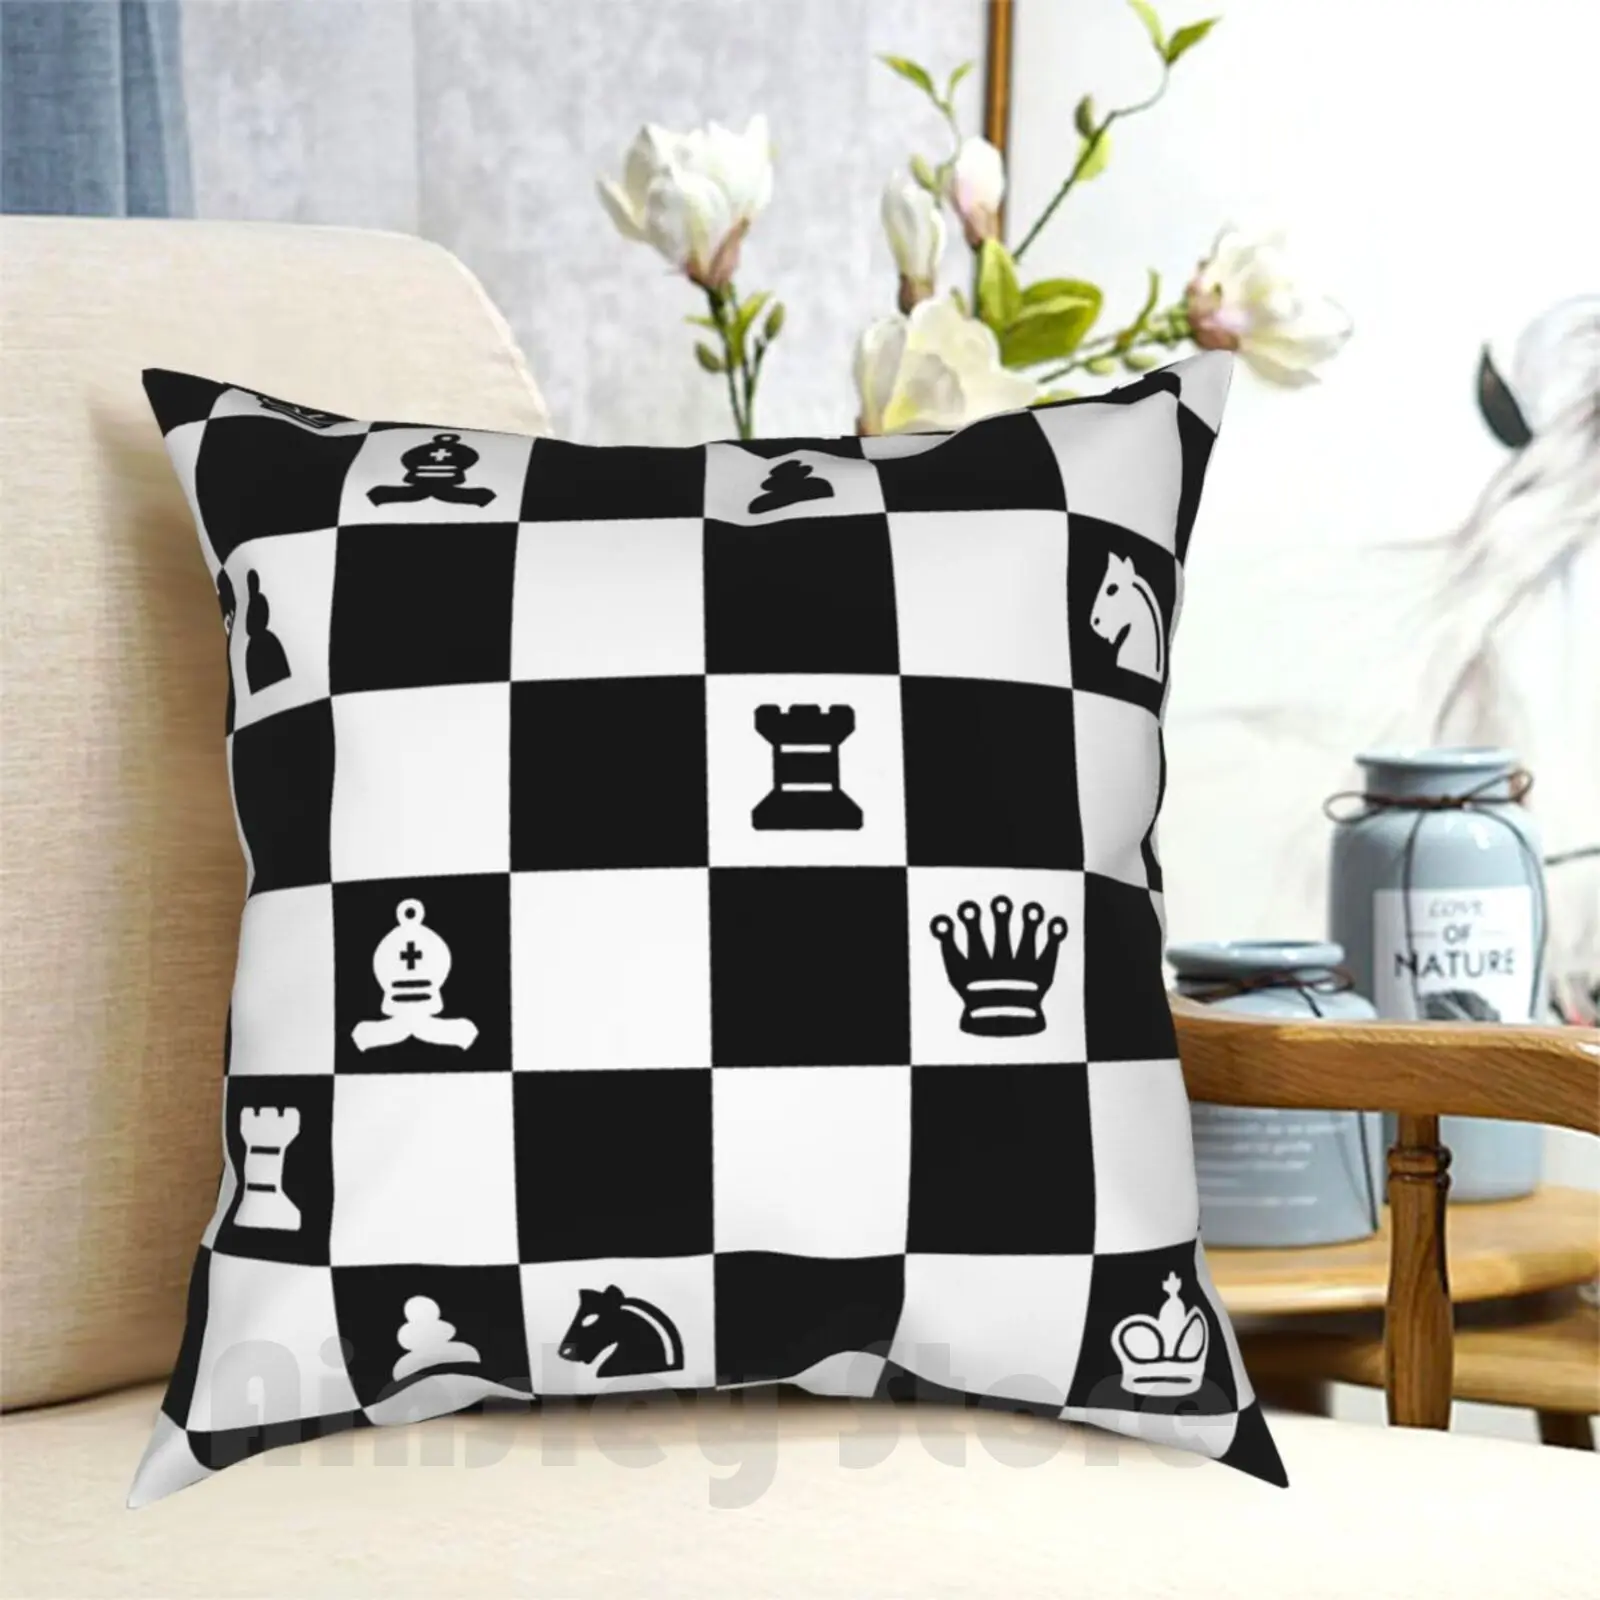 

Chess You Only Live Once Pillow Case Printed Home Soft Throw Pillow Chess You Only Live Once Yolo Julian Casablancas